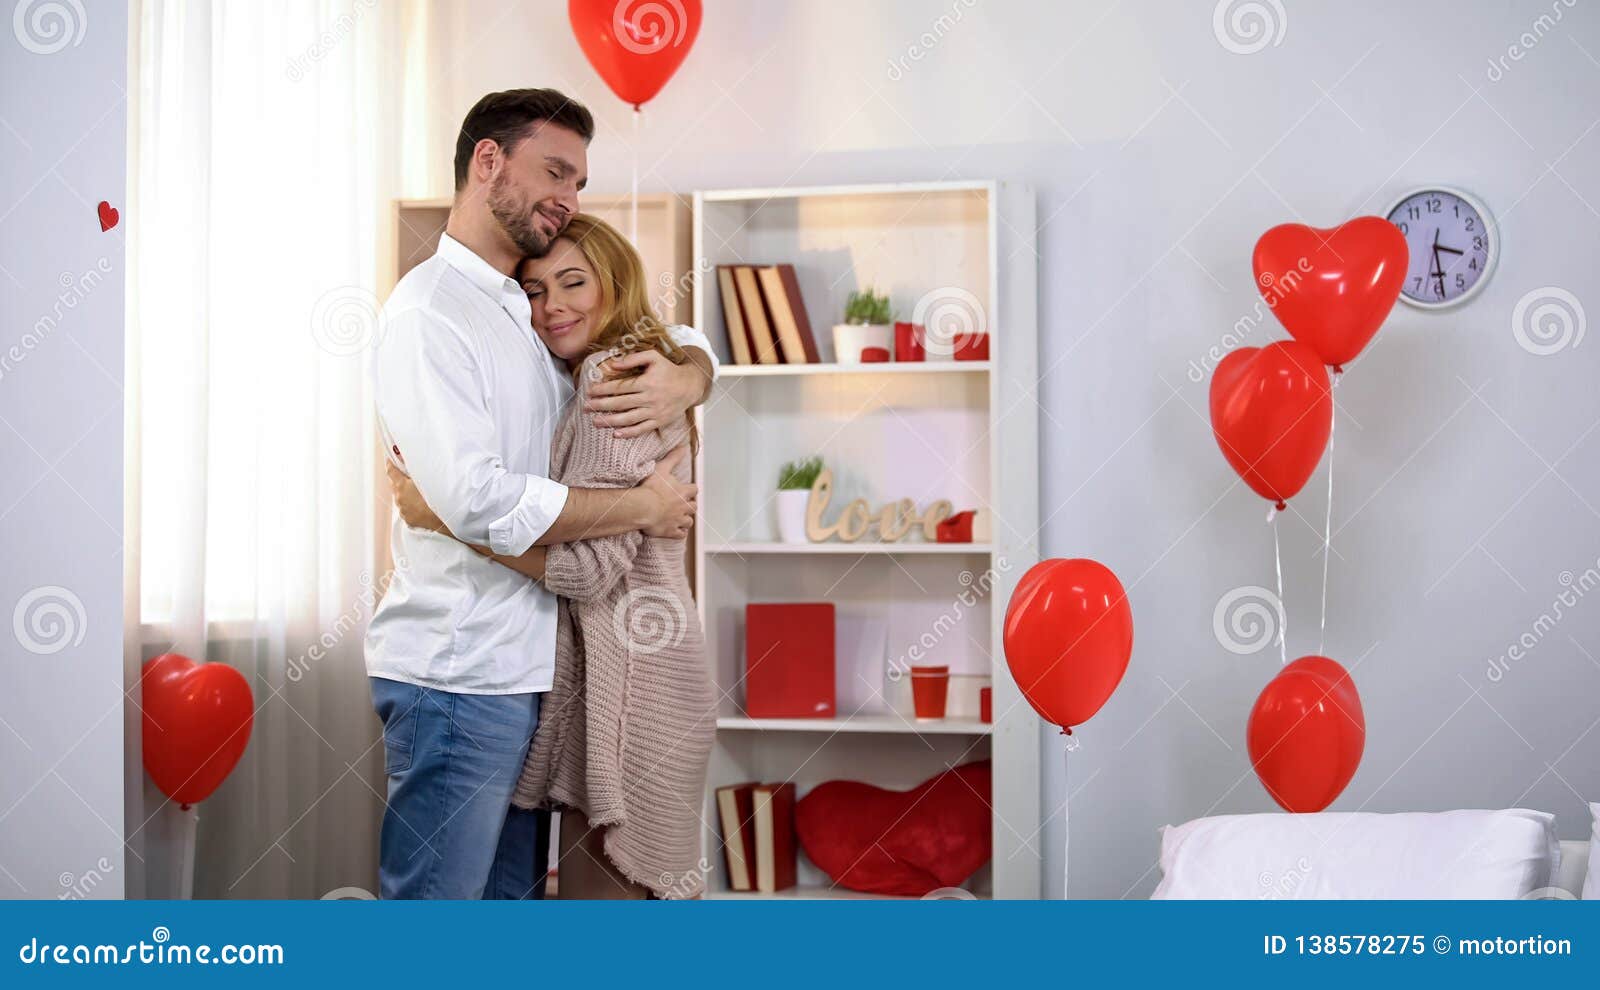 Husband Tenderly Hugging Wife in Room with Heart-shaped Balloons ... pic